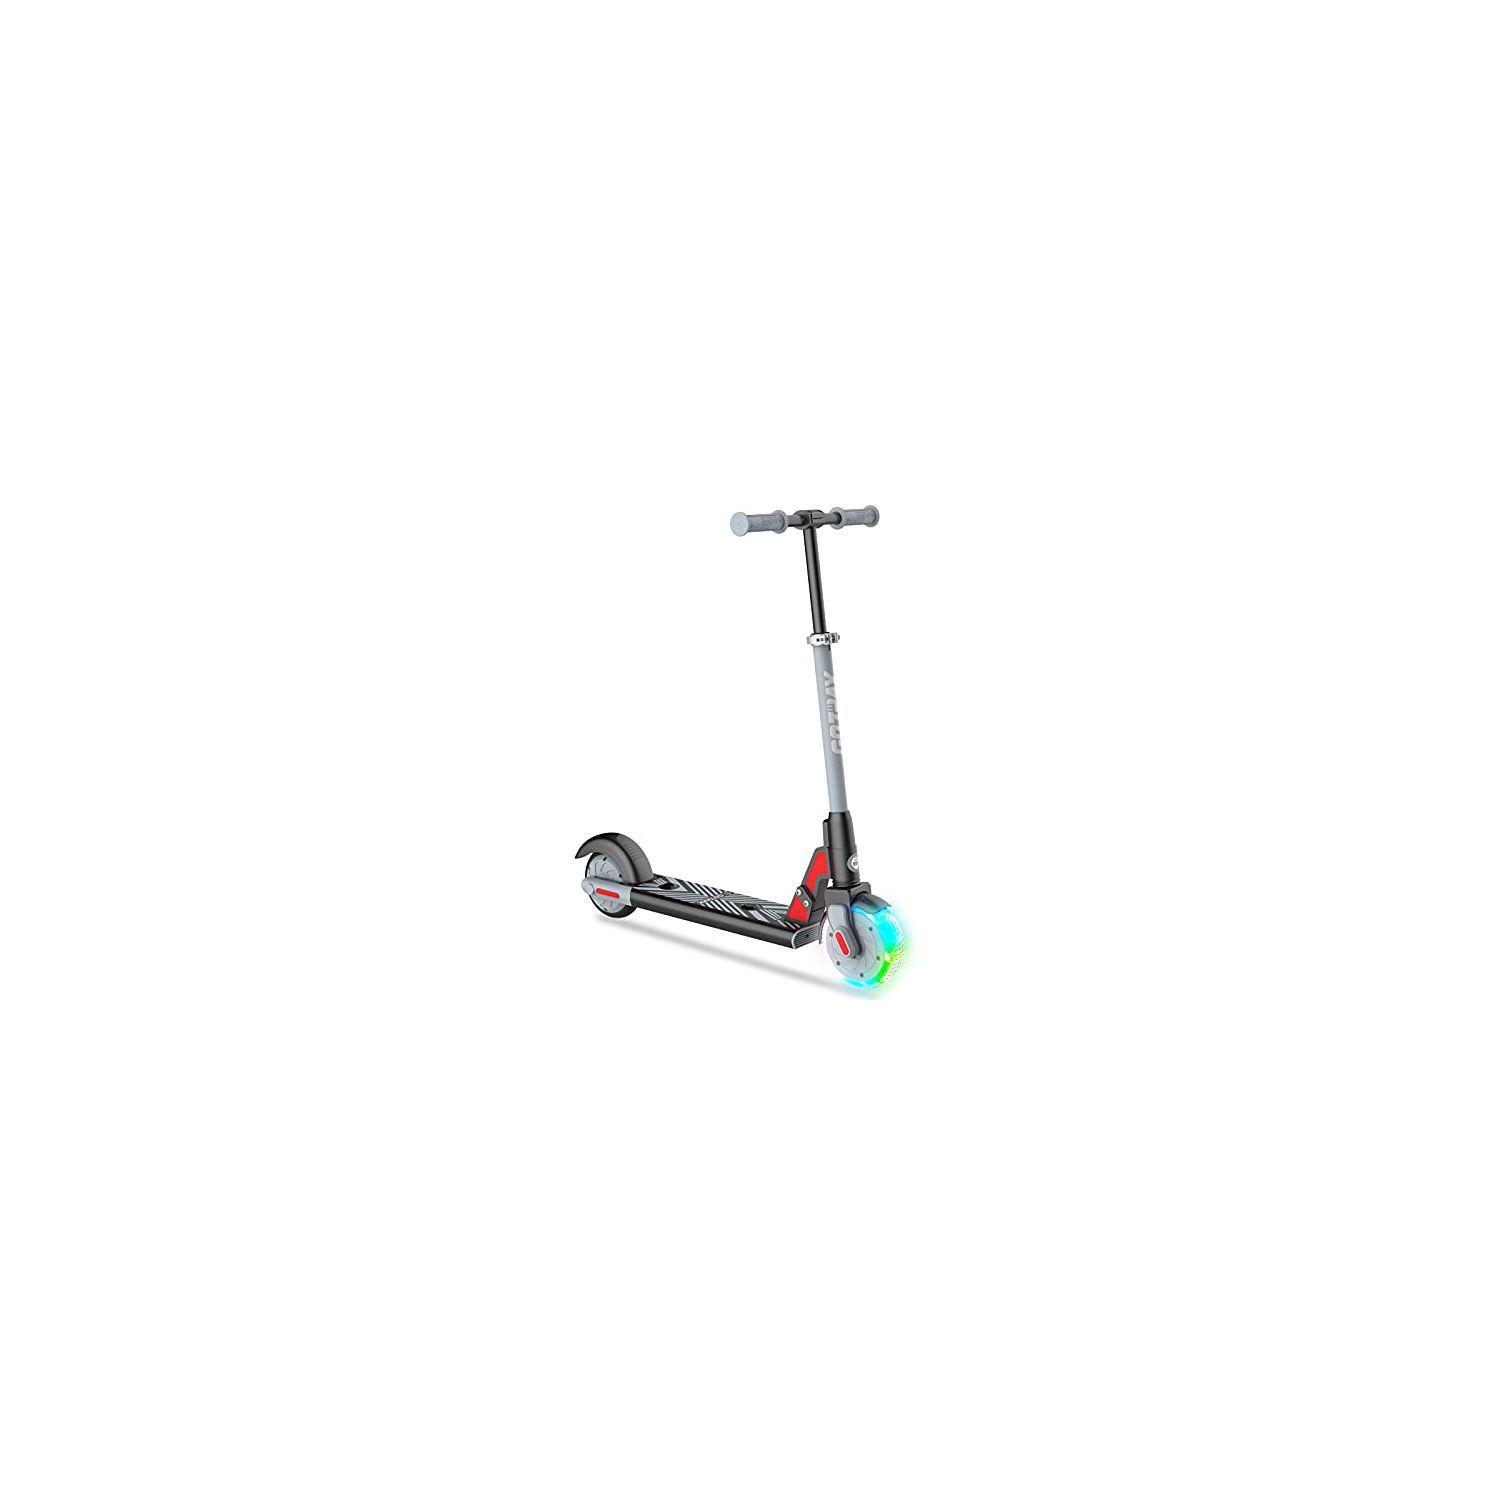 GOTRAX GKS LUMIOS Electric Scooter for Kids 6-12, 150W Motor and 25.2V 2.6Ah Lithium Battery, 6" LED Luminous Front Wheel and 3 Adjustable Heights, Safety UL2272 Certified(Gray)